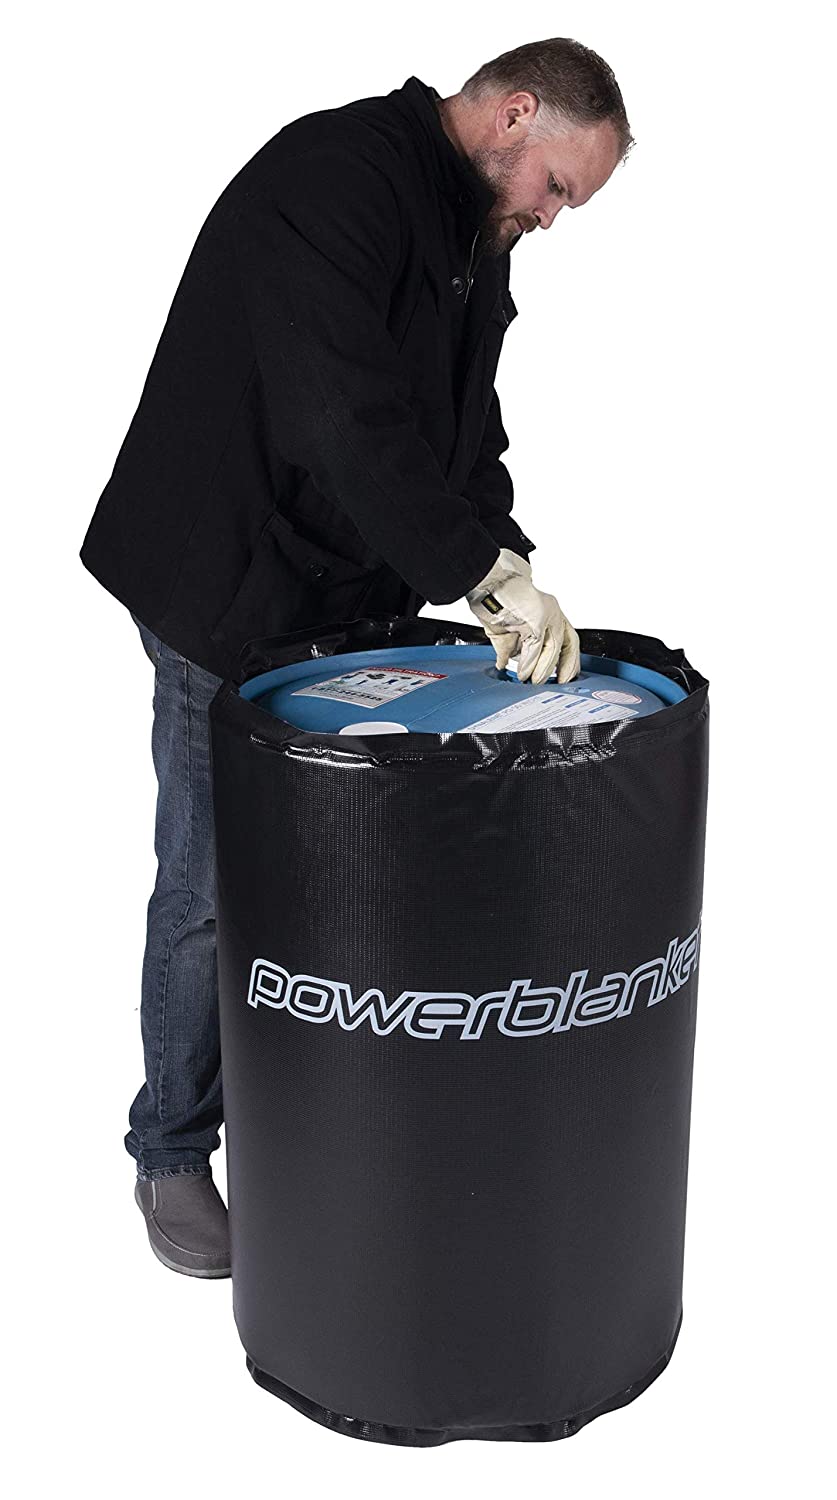 Powerblanket BH15RR 15 Gallon Insulated Drum Heating Blanket 100°F Fixed New